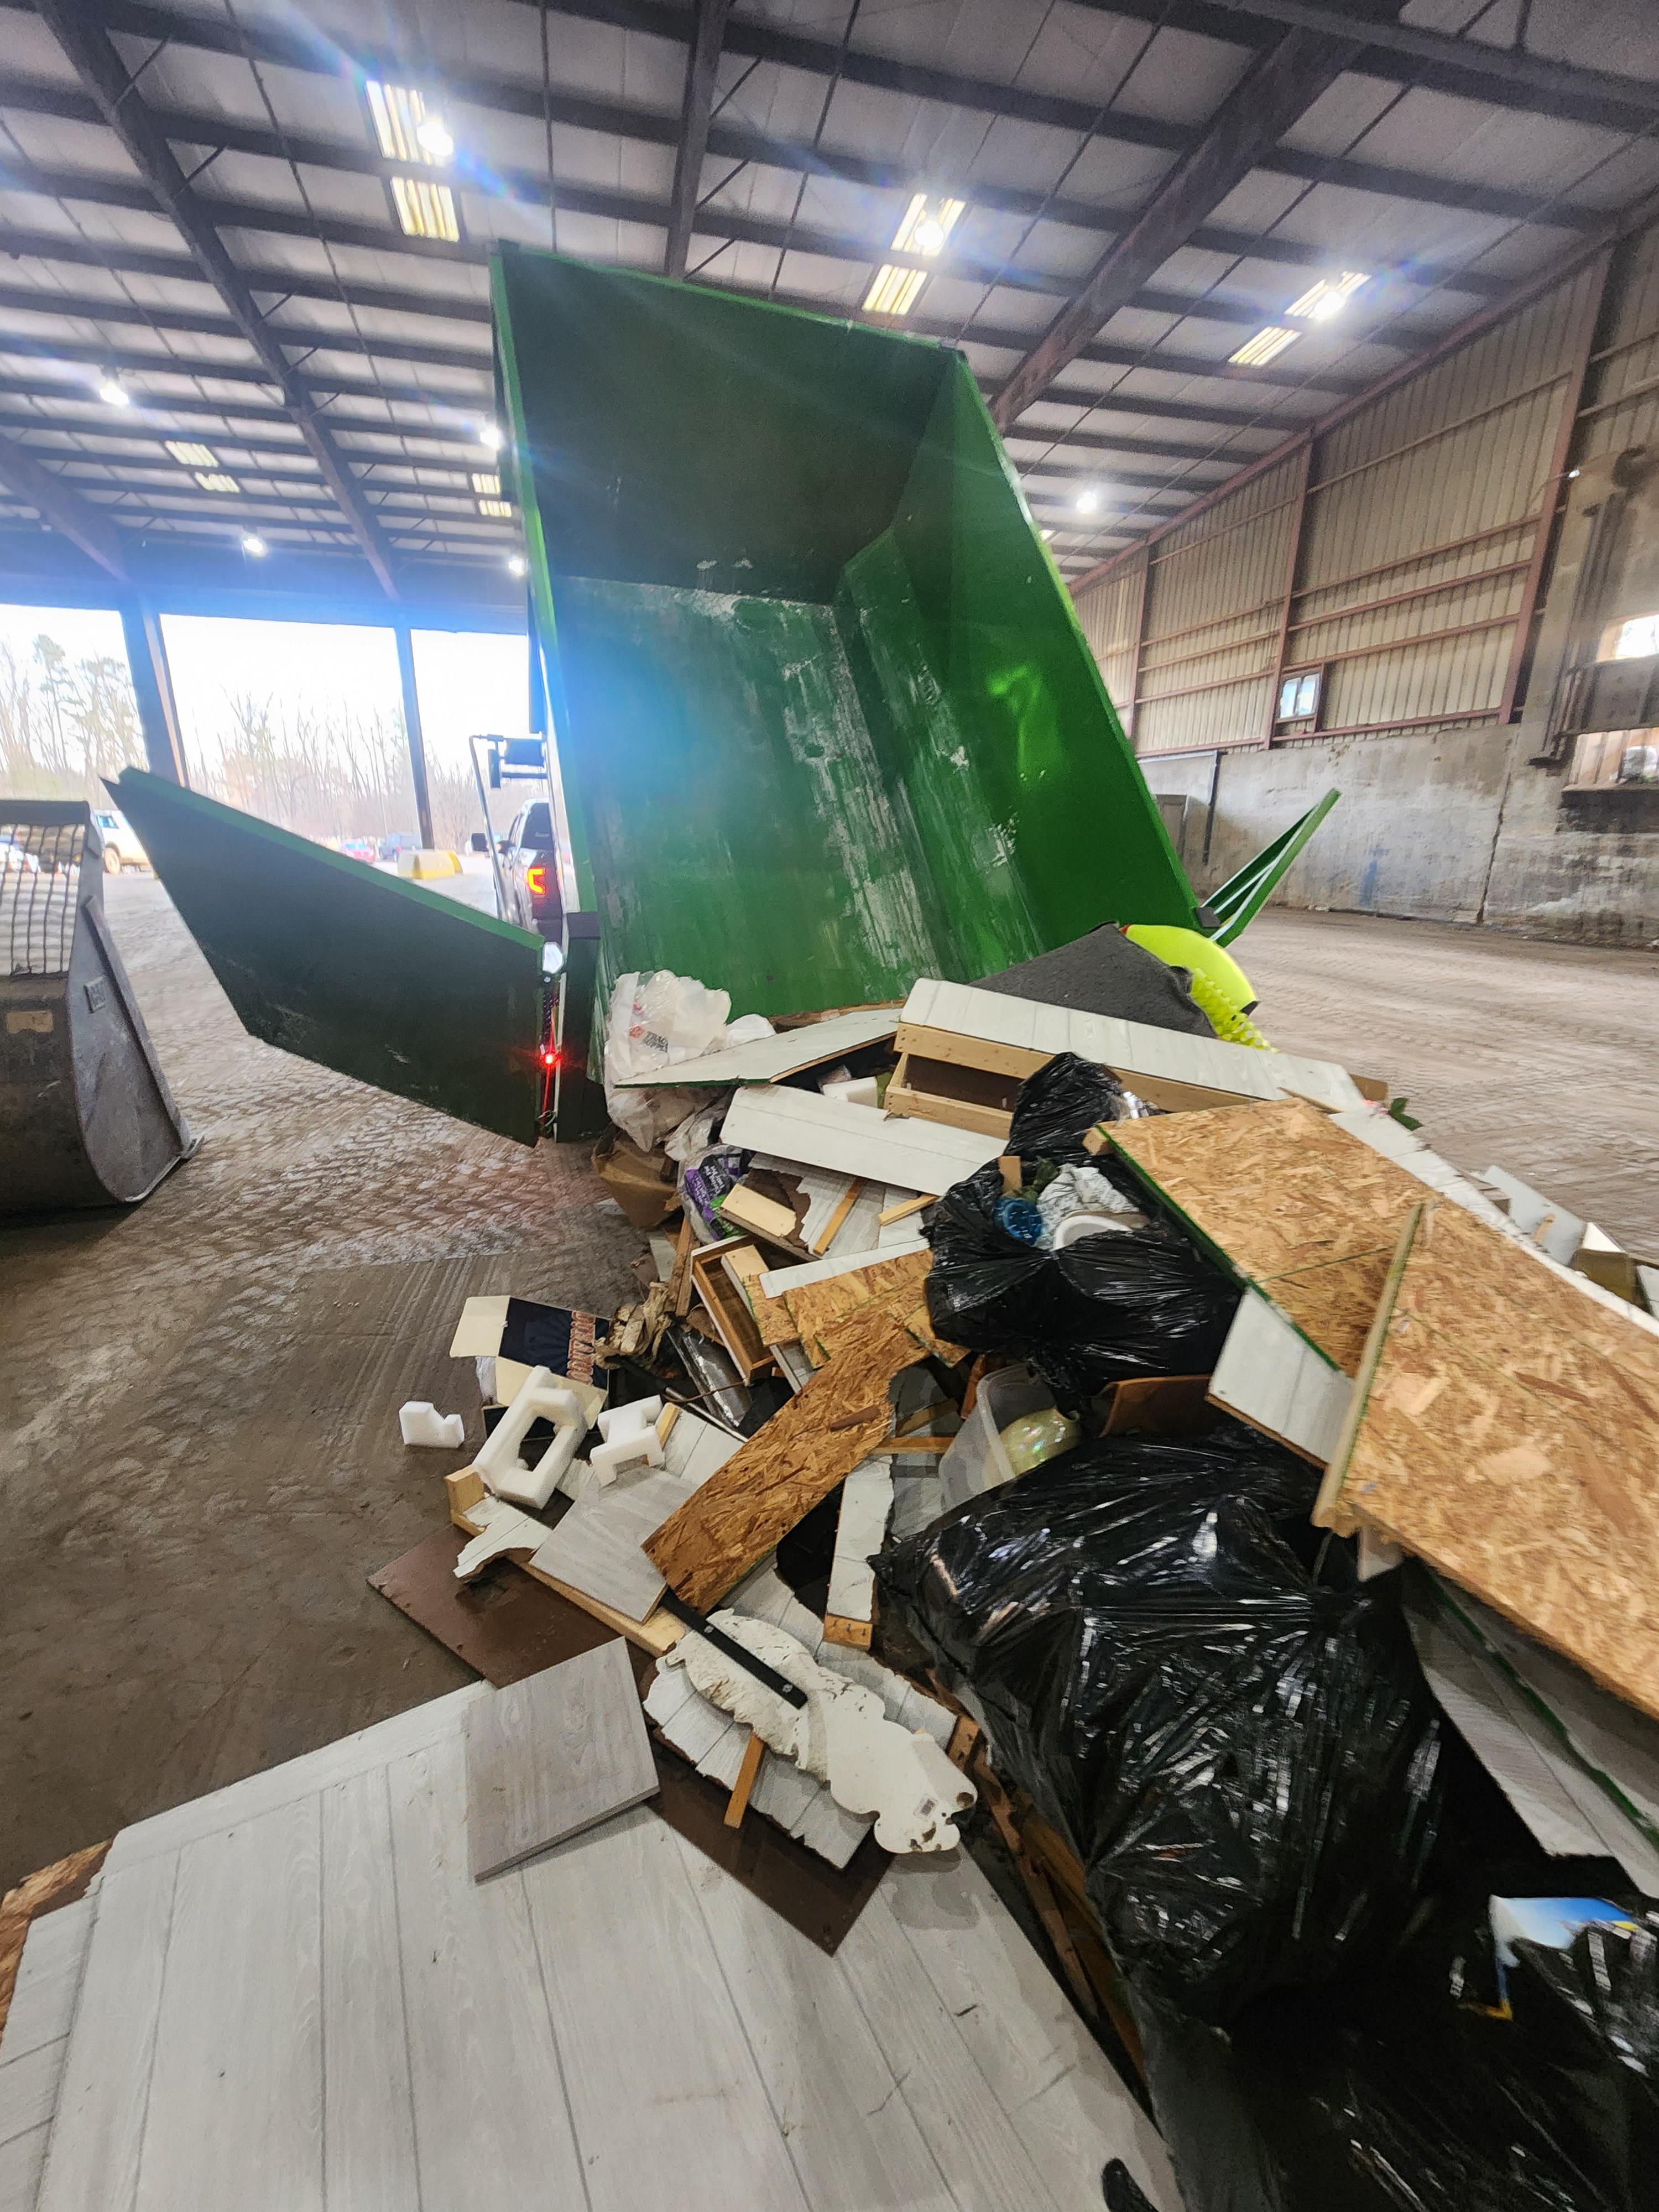 When you're looking for "dumpster rental near me" in Statesville, trust Fill-A-Bin Dumpster Rental & Junk Removal for local and accessible dumpster rental options.